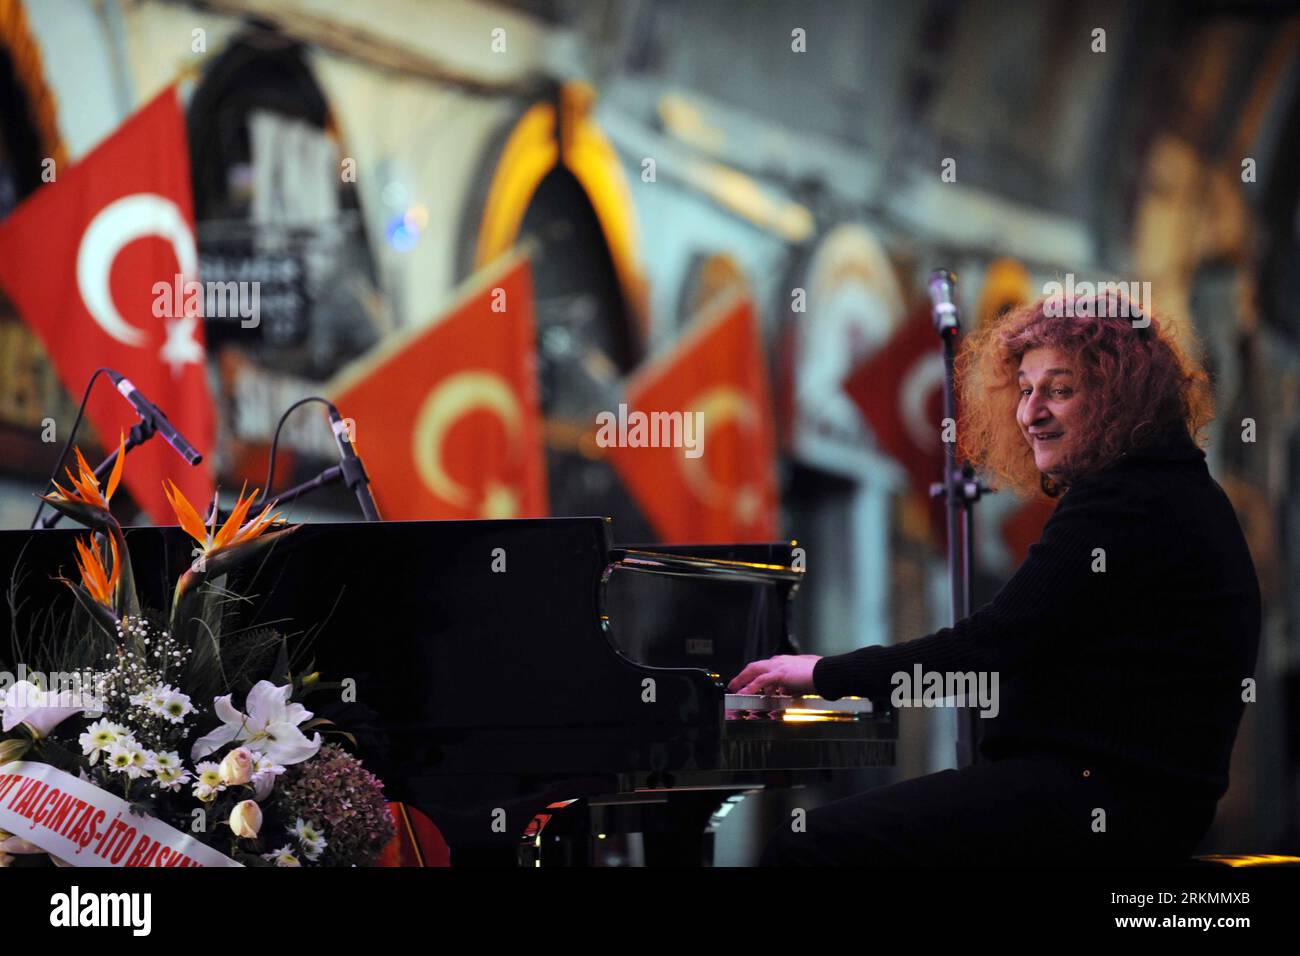 Bildnummer: 56786216  Datum: 25.12.2011  Copyright: imago/Xinhua (111225) -- ISTANBUL, Dec. 25, 2011 (Xinhua) -- Pianist Tuluyhan Ugurlu performs on the concert as the final event of the Grand Bazaar 550th Anniversary Celebrations in Istanbul, Turkey, on Dec. 25, 2011. Called simply the Kapali Carsi (Covered Market) in Turkish, the 550-year-old domed-capped bazaar is located at the heart of Istanbul. (Xinhua/Ma Yan) TURKEY-ISTANBUL-GRAND BAZAAR PUBLICATIONxNOTxINxCHN People Entertainment Musik Aktion x0x xst 2011 quer      56786216 Date 25 12 2011 Copyright Imago XINHUA  Istanbul DEC 25 2011 X Stock Photo